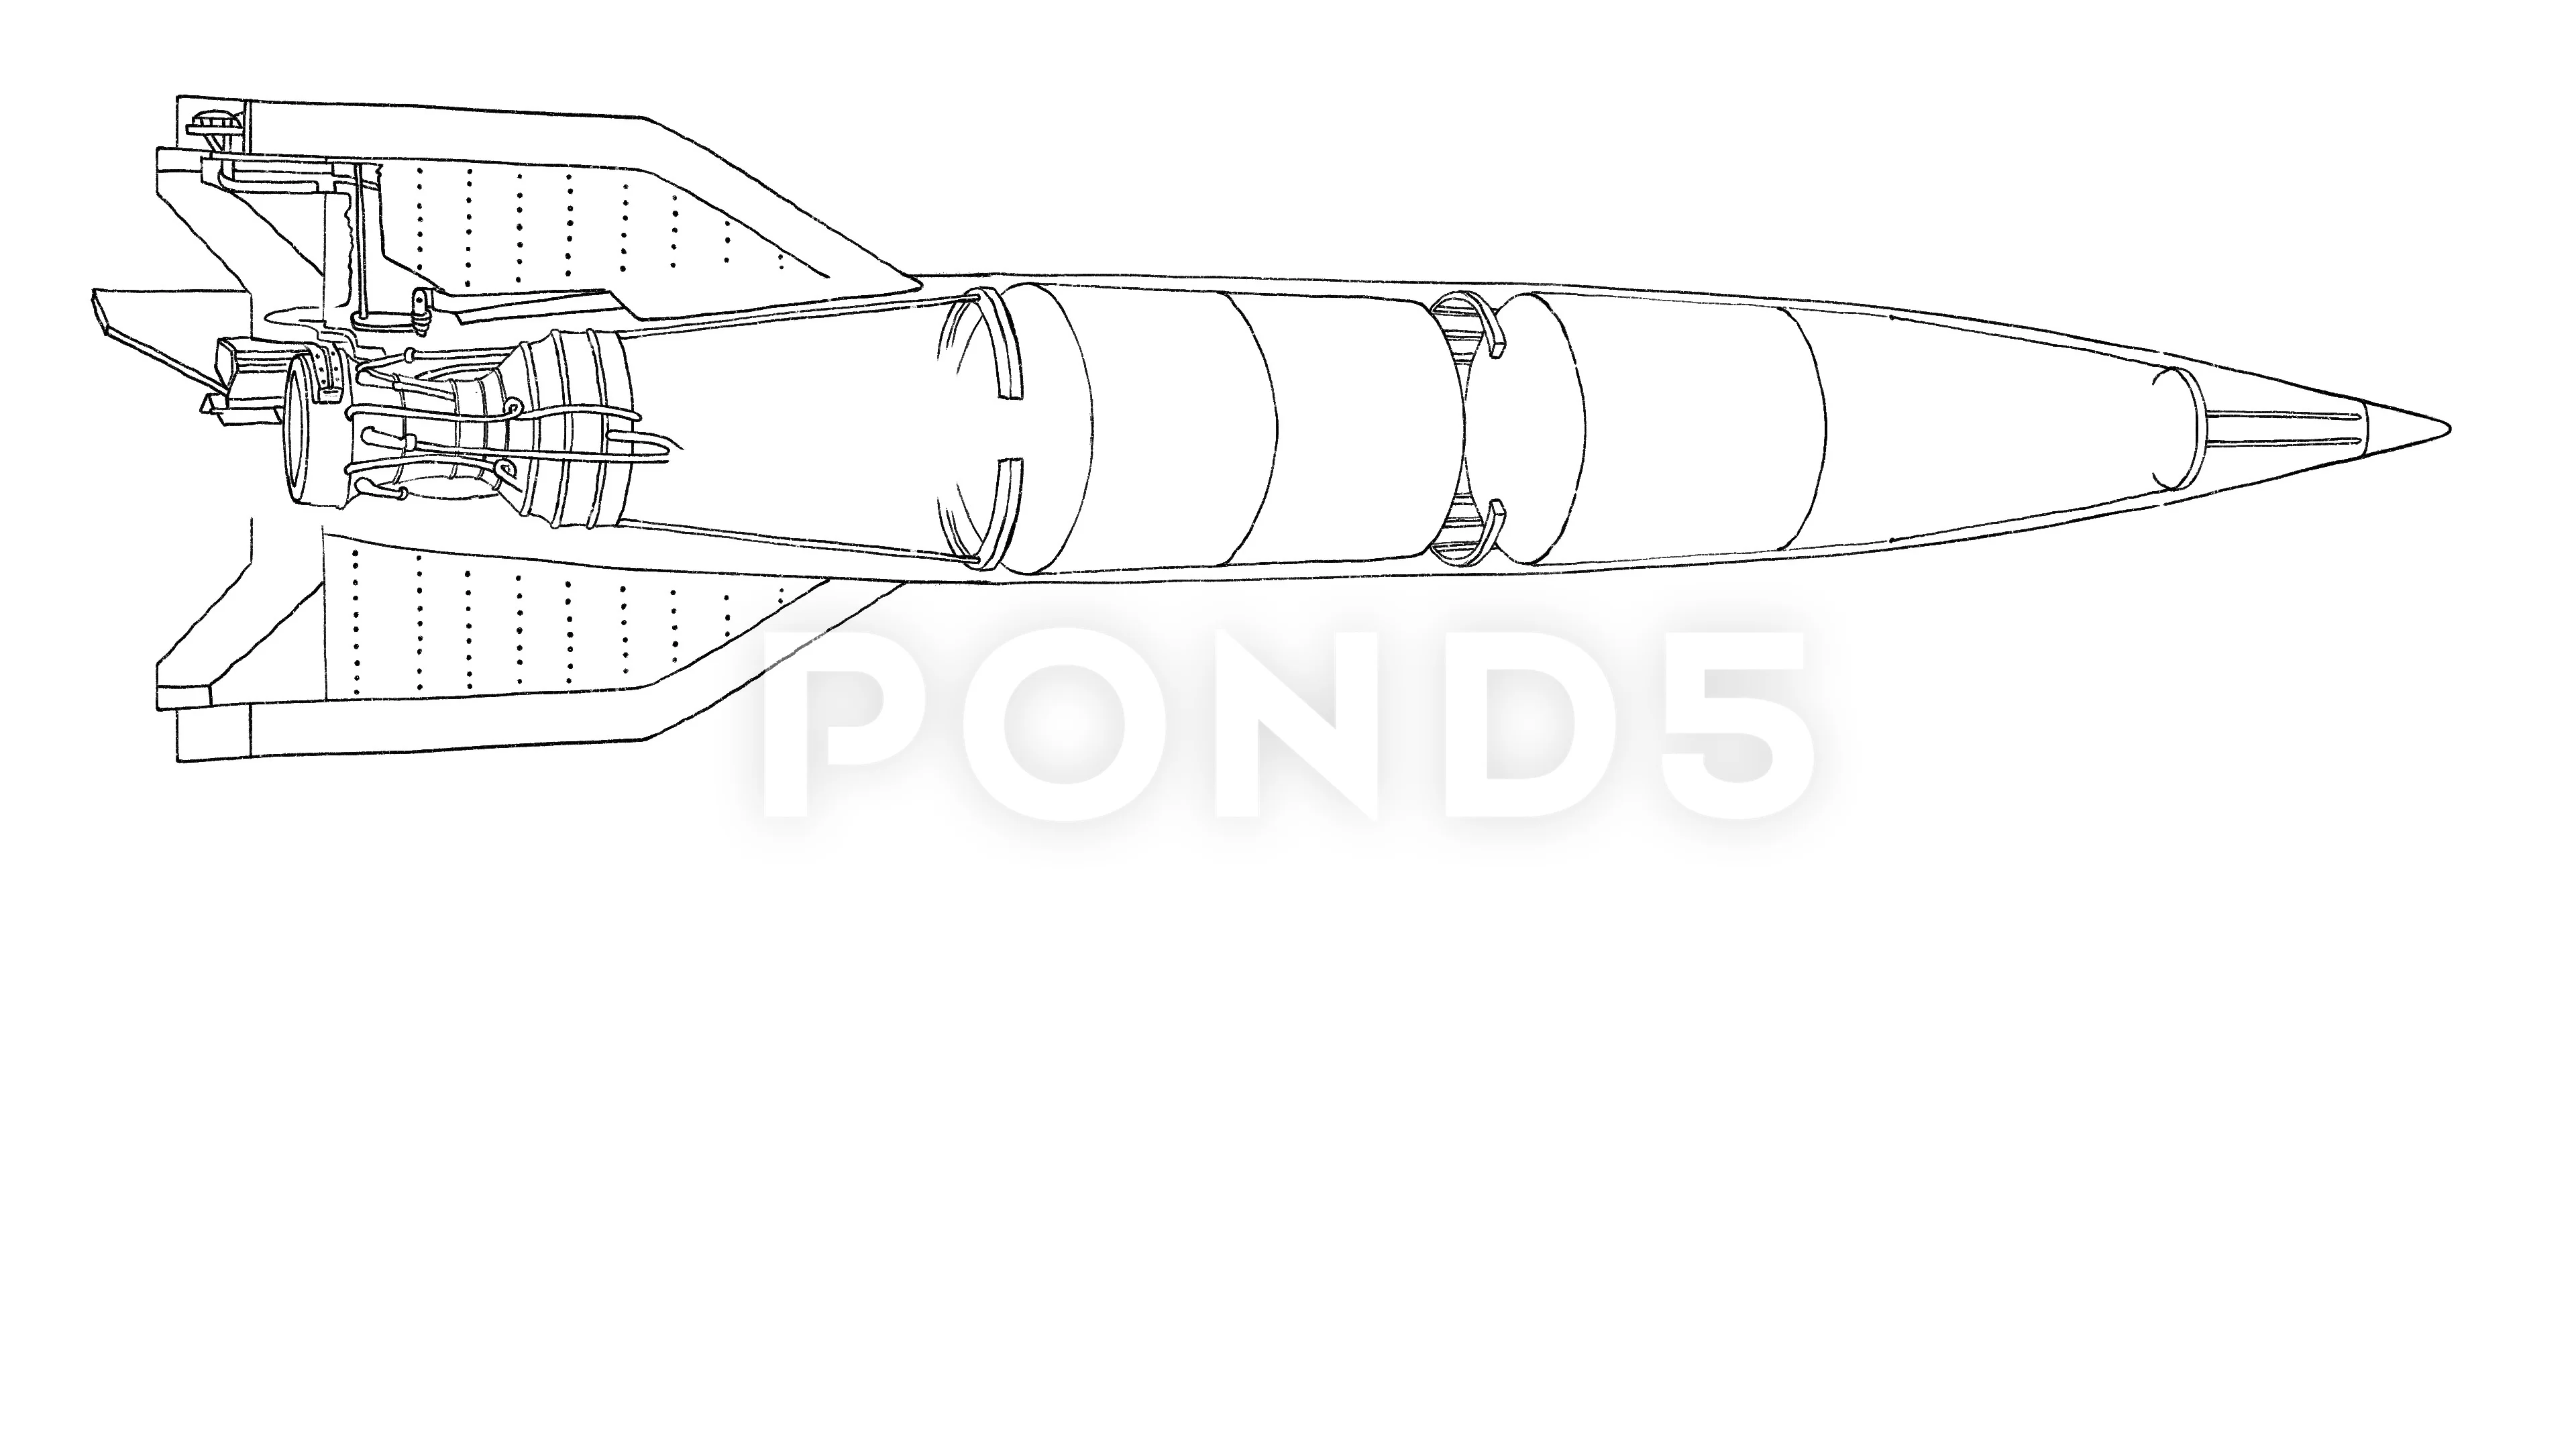 6613 Drawings Missiles Images Stock Photos  Vectors  Shutterstock